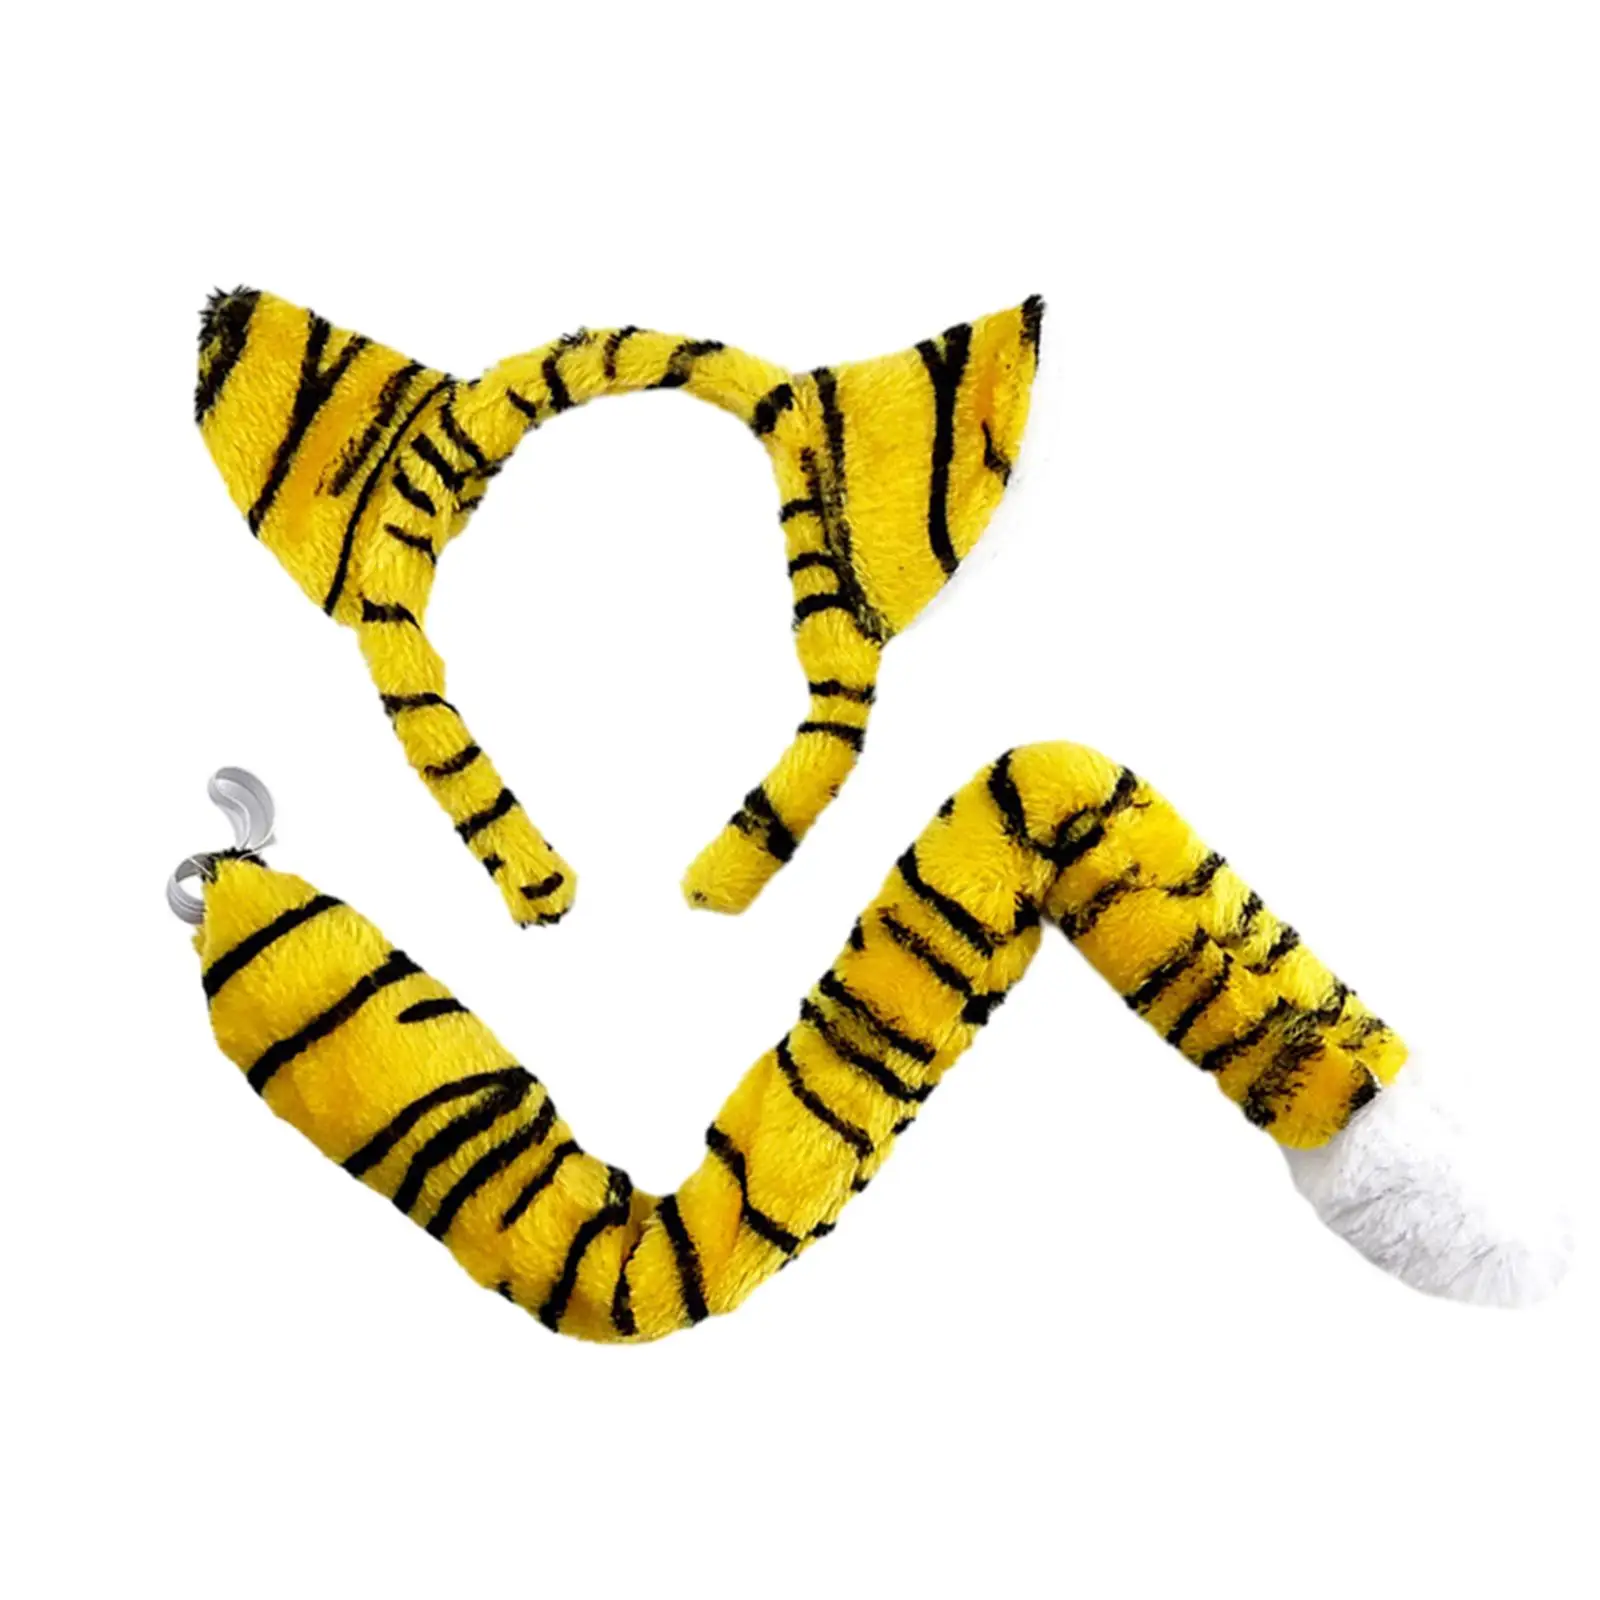 Tiger Ears and Tail Set Ears Headband Headwear Props Dress up Headdress for Party Carnival Birthday Masquerade Stage Performance